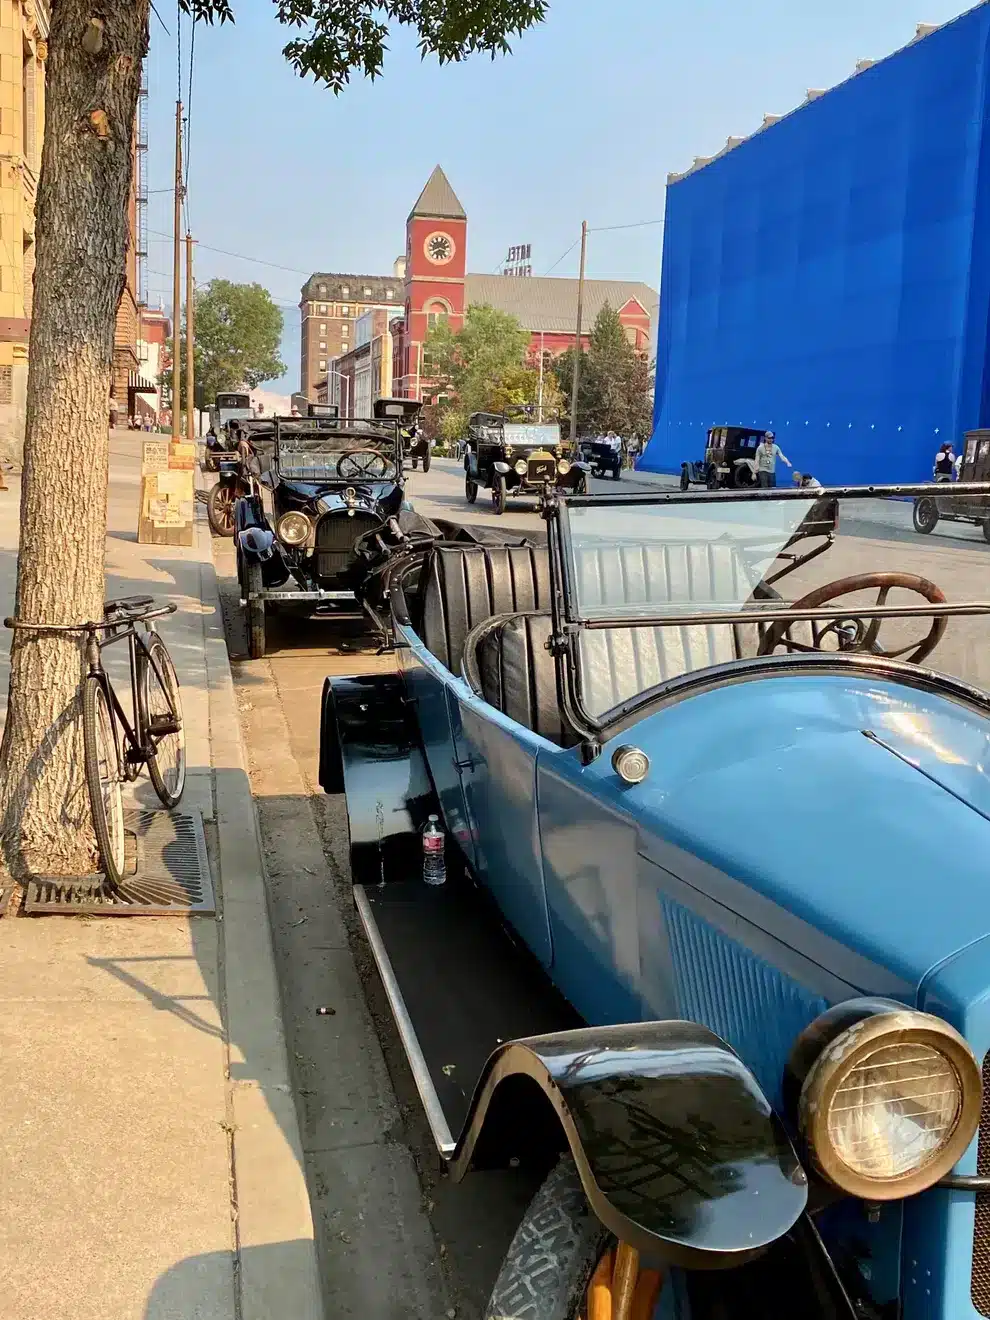 The cars on the set of "1923" were vintage, but the building was not, so it was draped in blue to be digitally replaced.